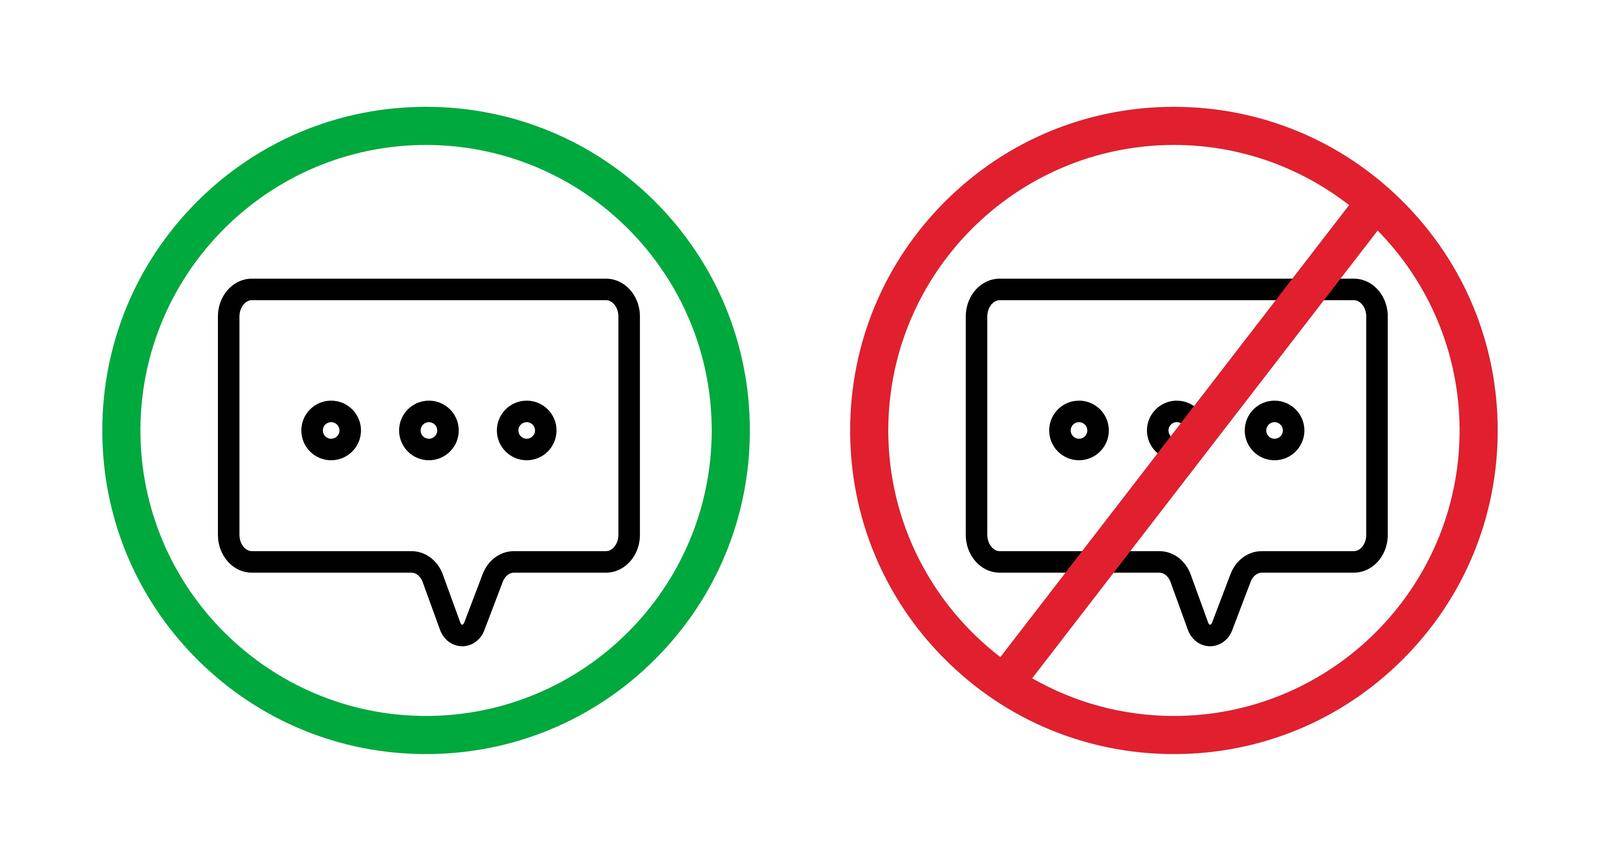 Talk prohibited and talk permission icon set. Vector. by illust_monster